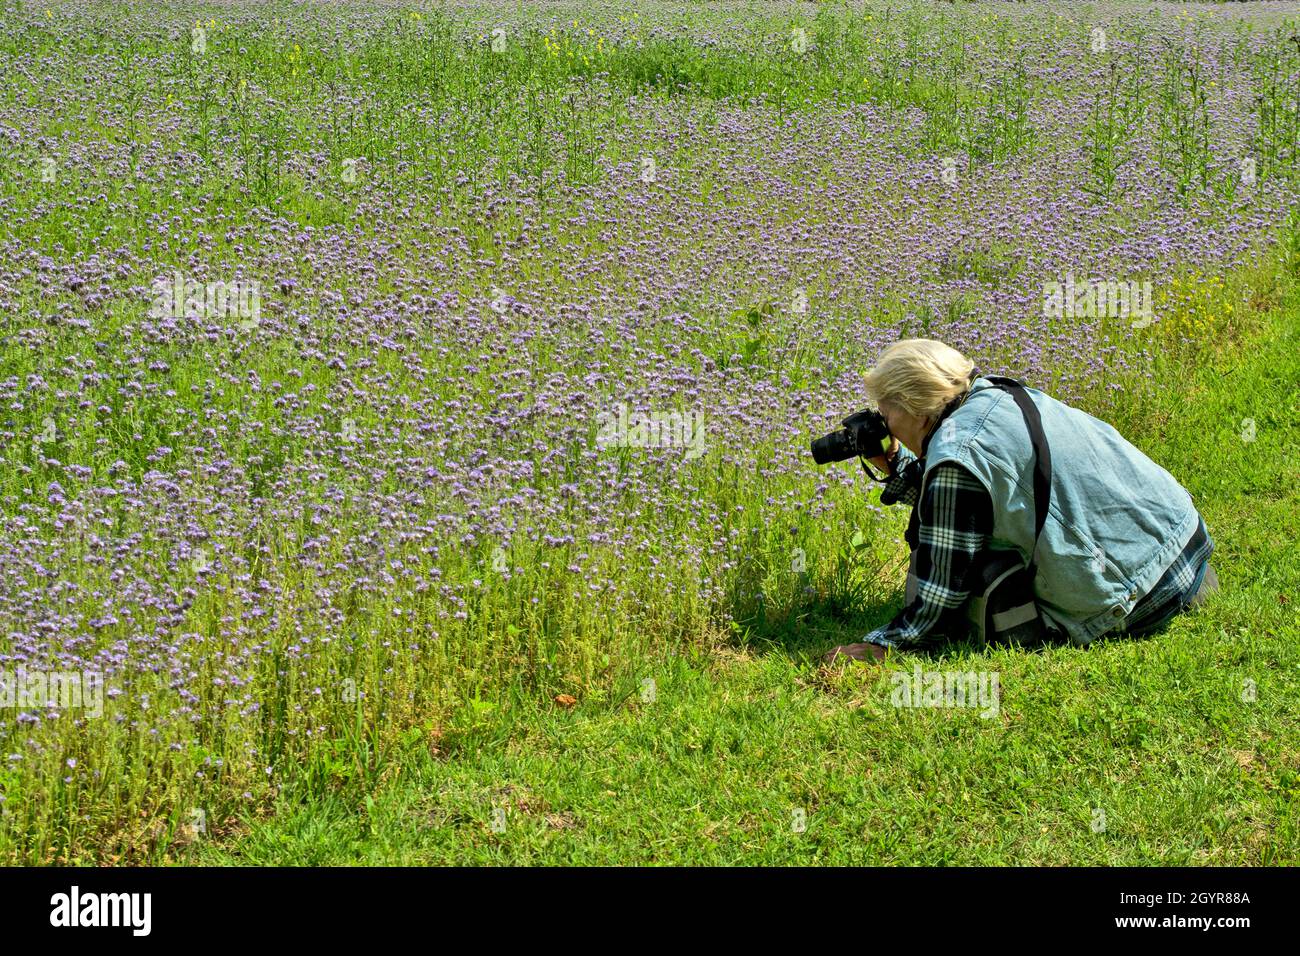 Woman photographs the plant Phacelia tanacetifolia and bees that diligently collect pollen. Stock Photo